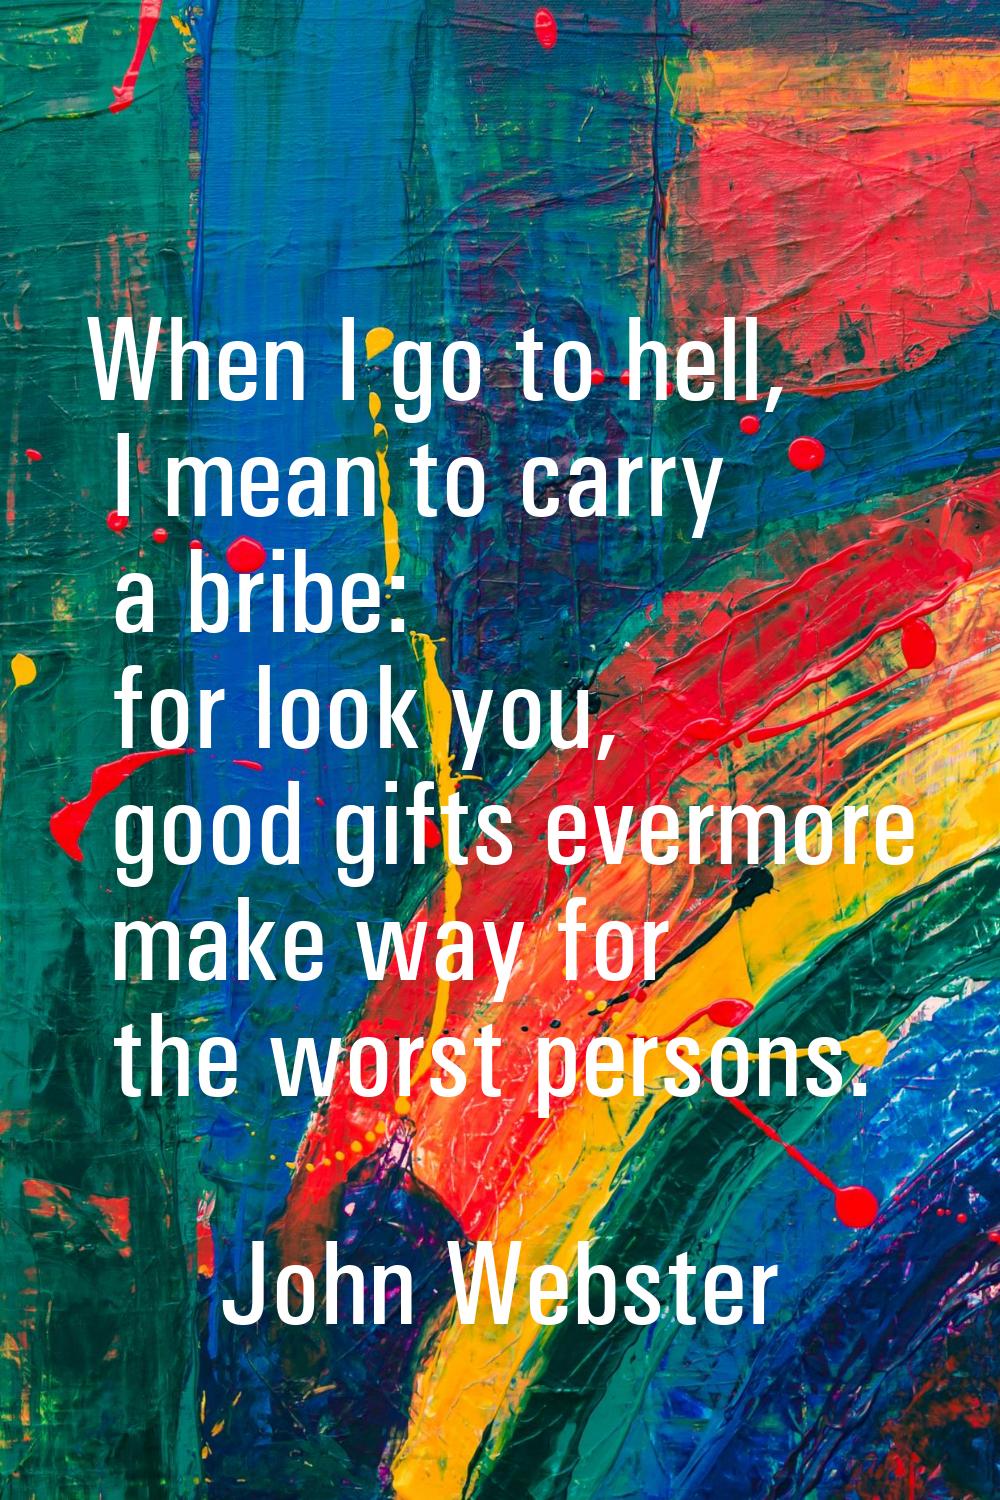 When I go to hell, I mean to carry a bribe: for look you, good gifts evermore make way for the wors